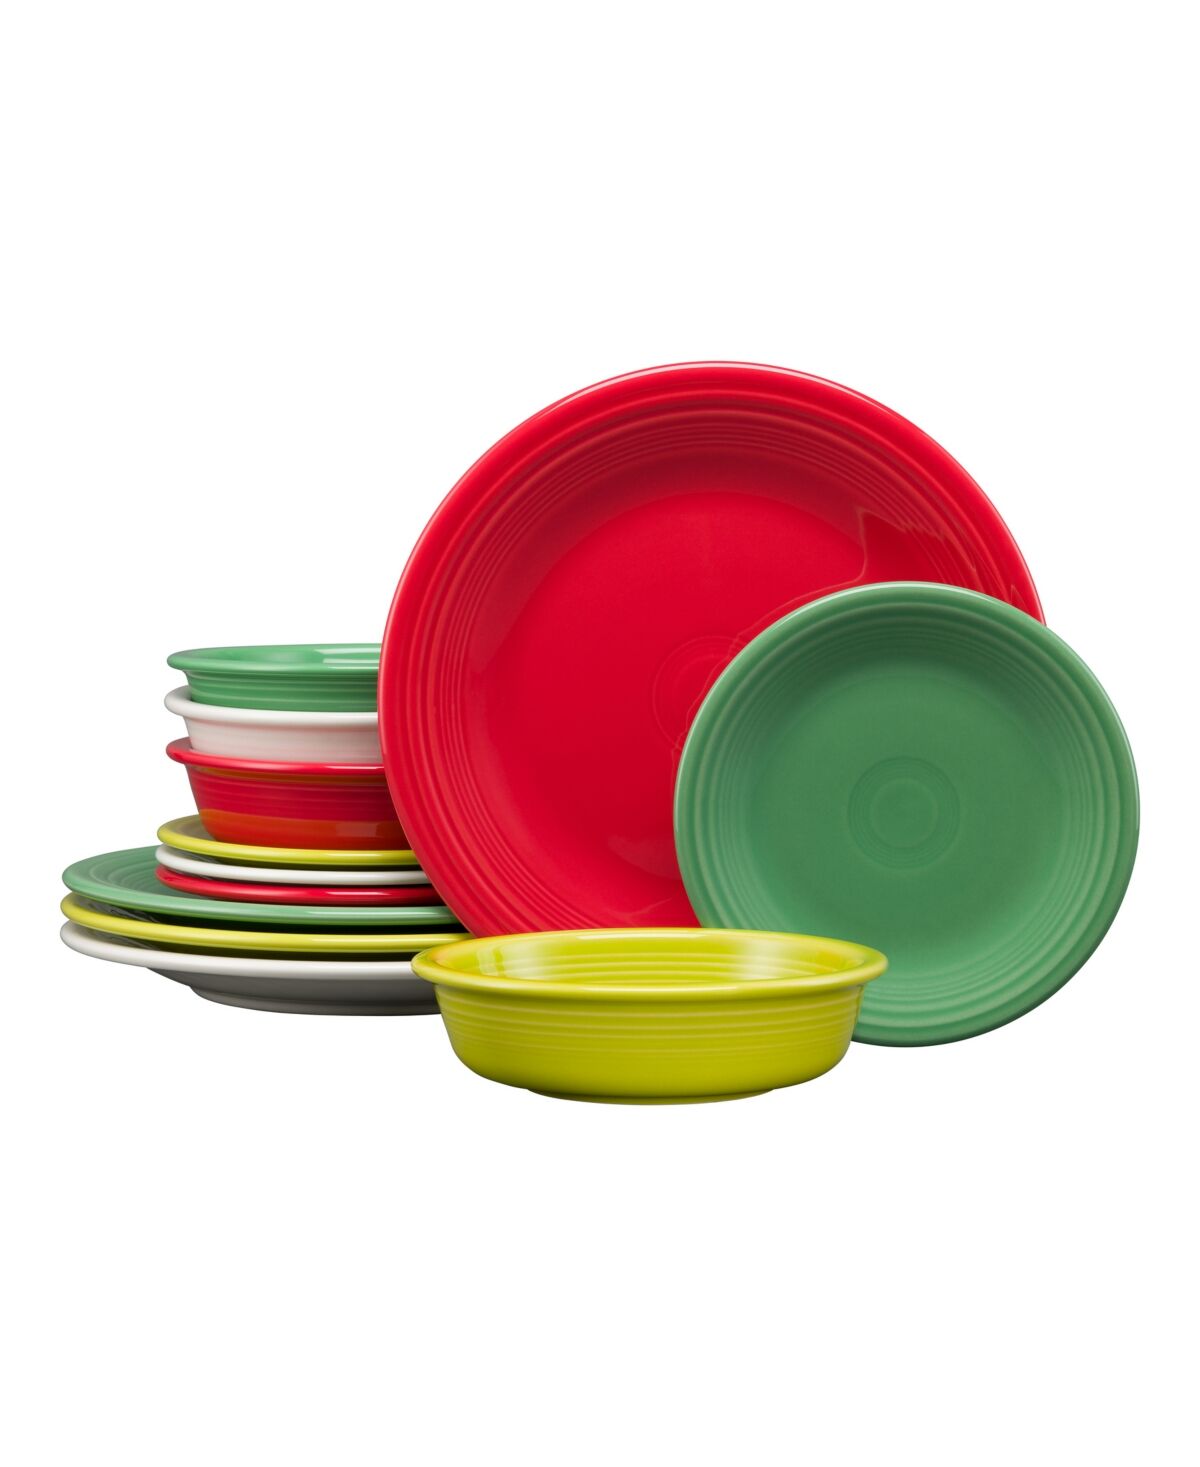 Fiesta Mixed Colors Holiday Classic 12-pc Dinnerware Set, Service for 4 - Mixed Classic Holiday Colors